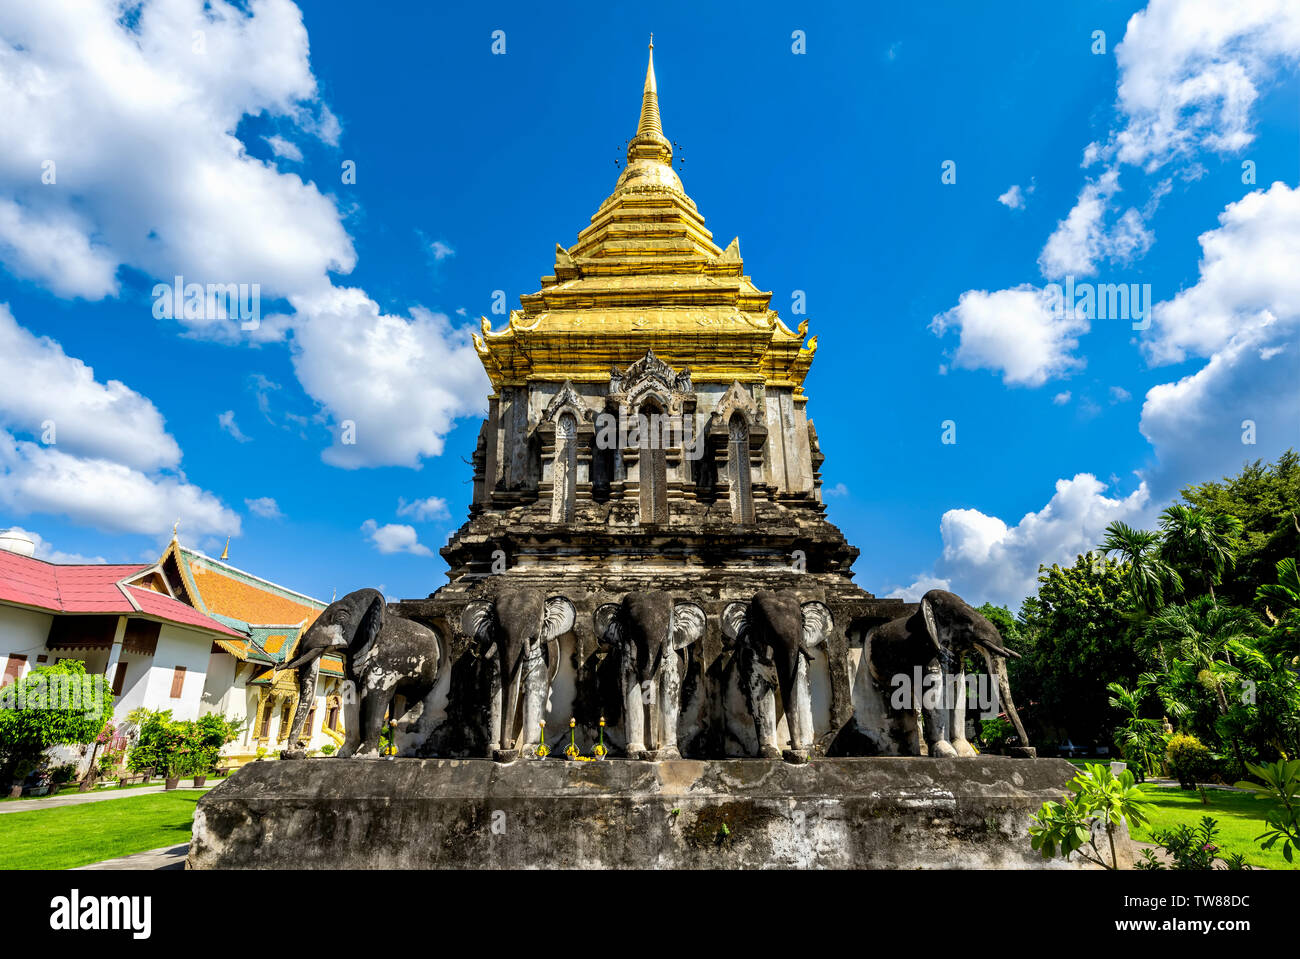 The picture was taken at the Ching Man Temple in Chiang Mai, Thailand. Stock Photo